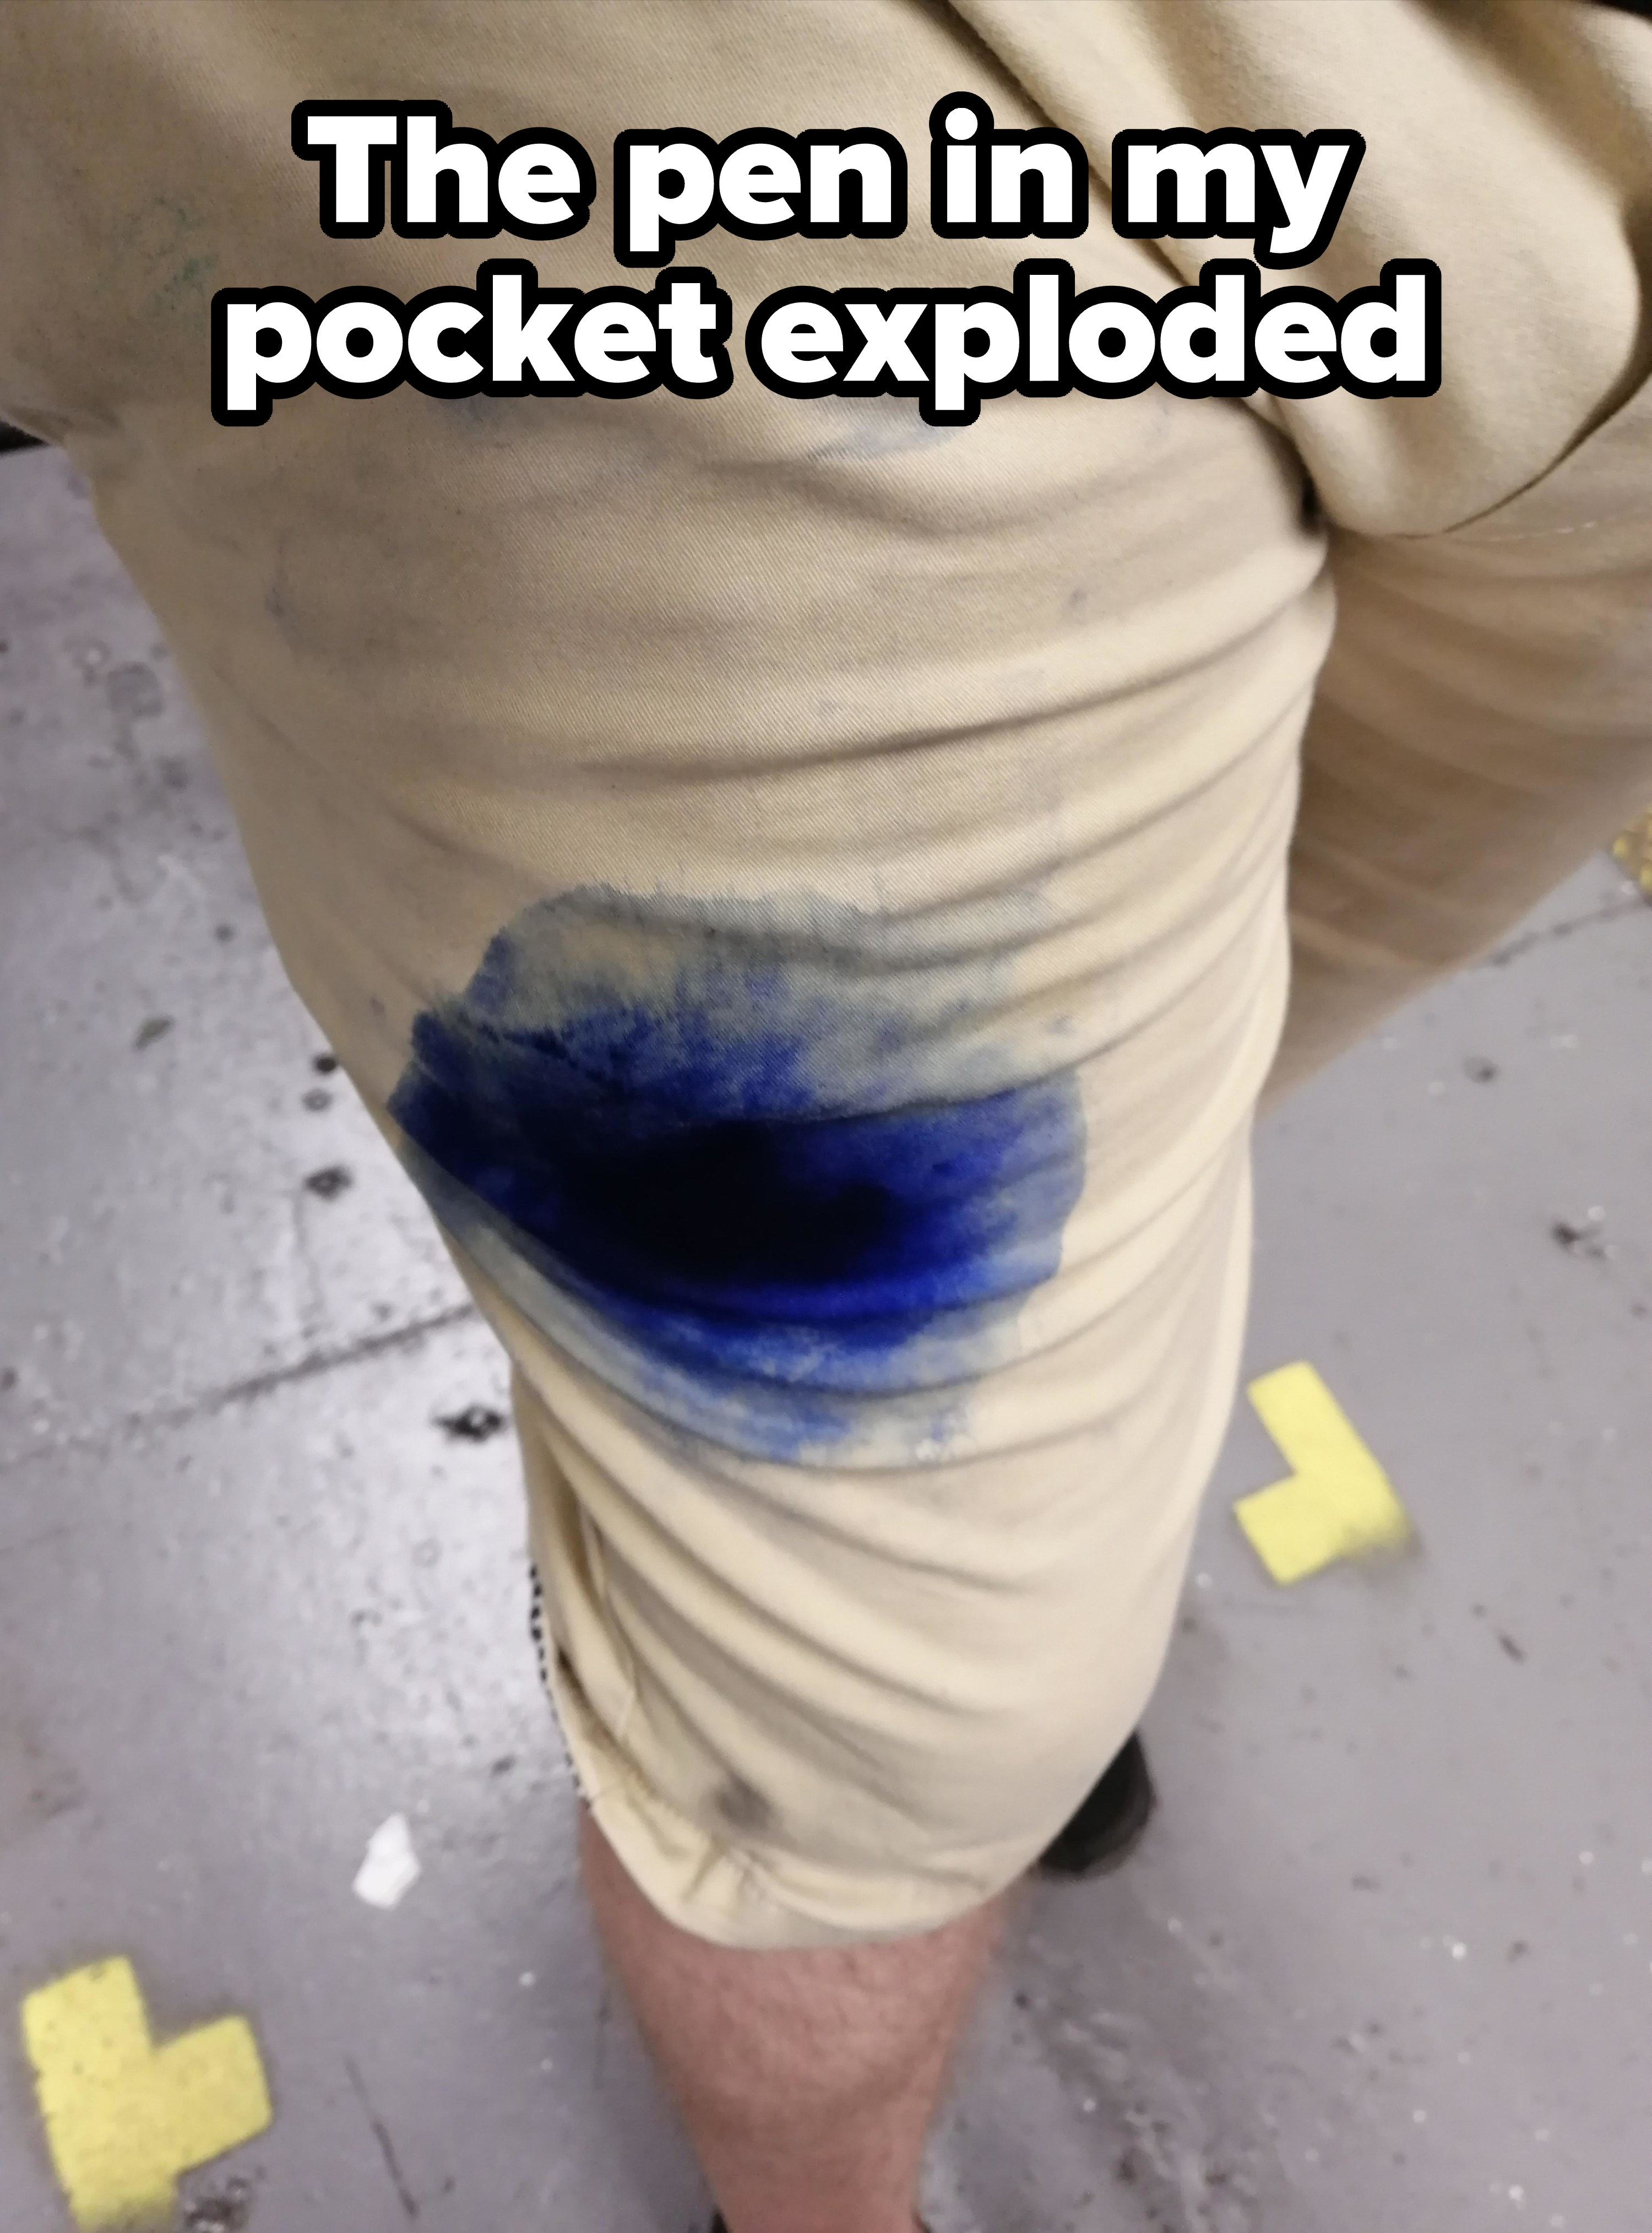 Pen in a pocket that exploded, leaving large ink stain